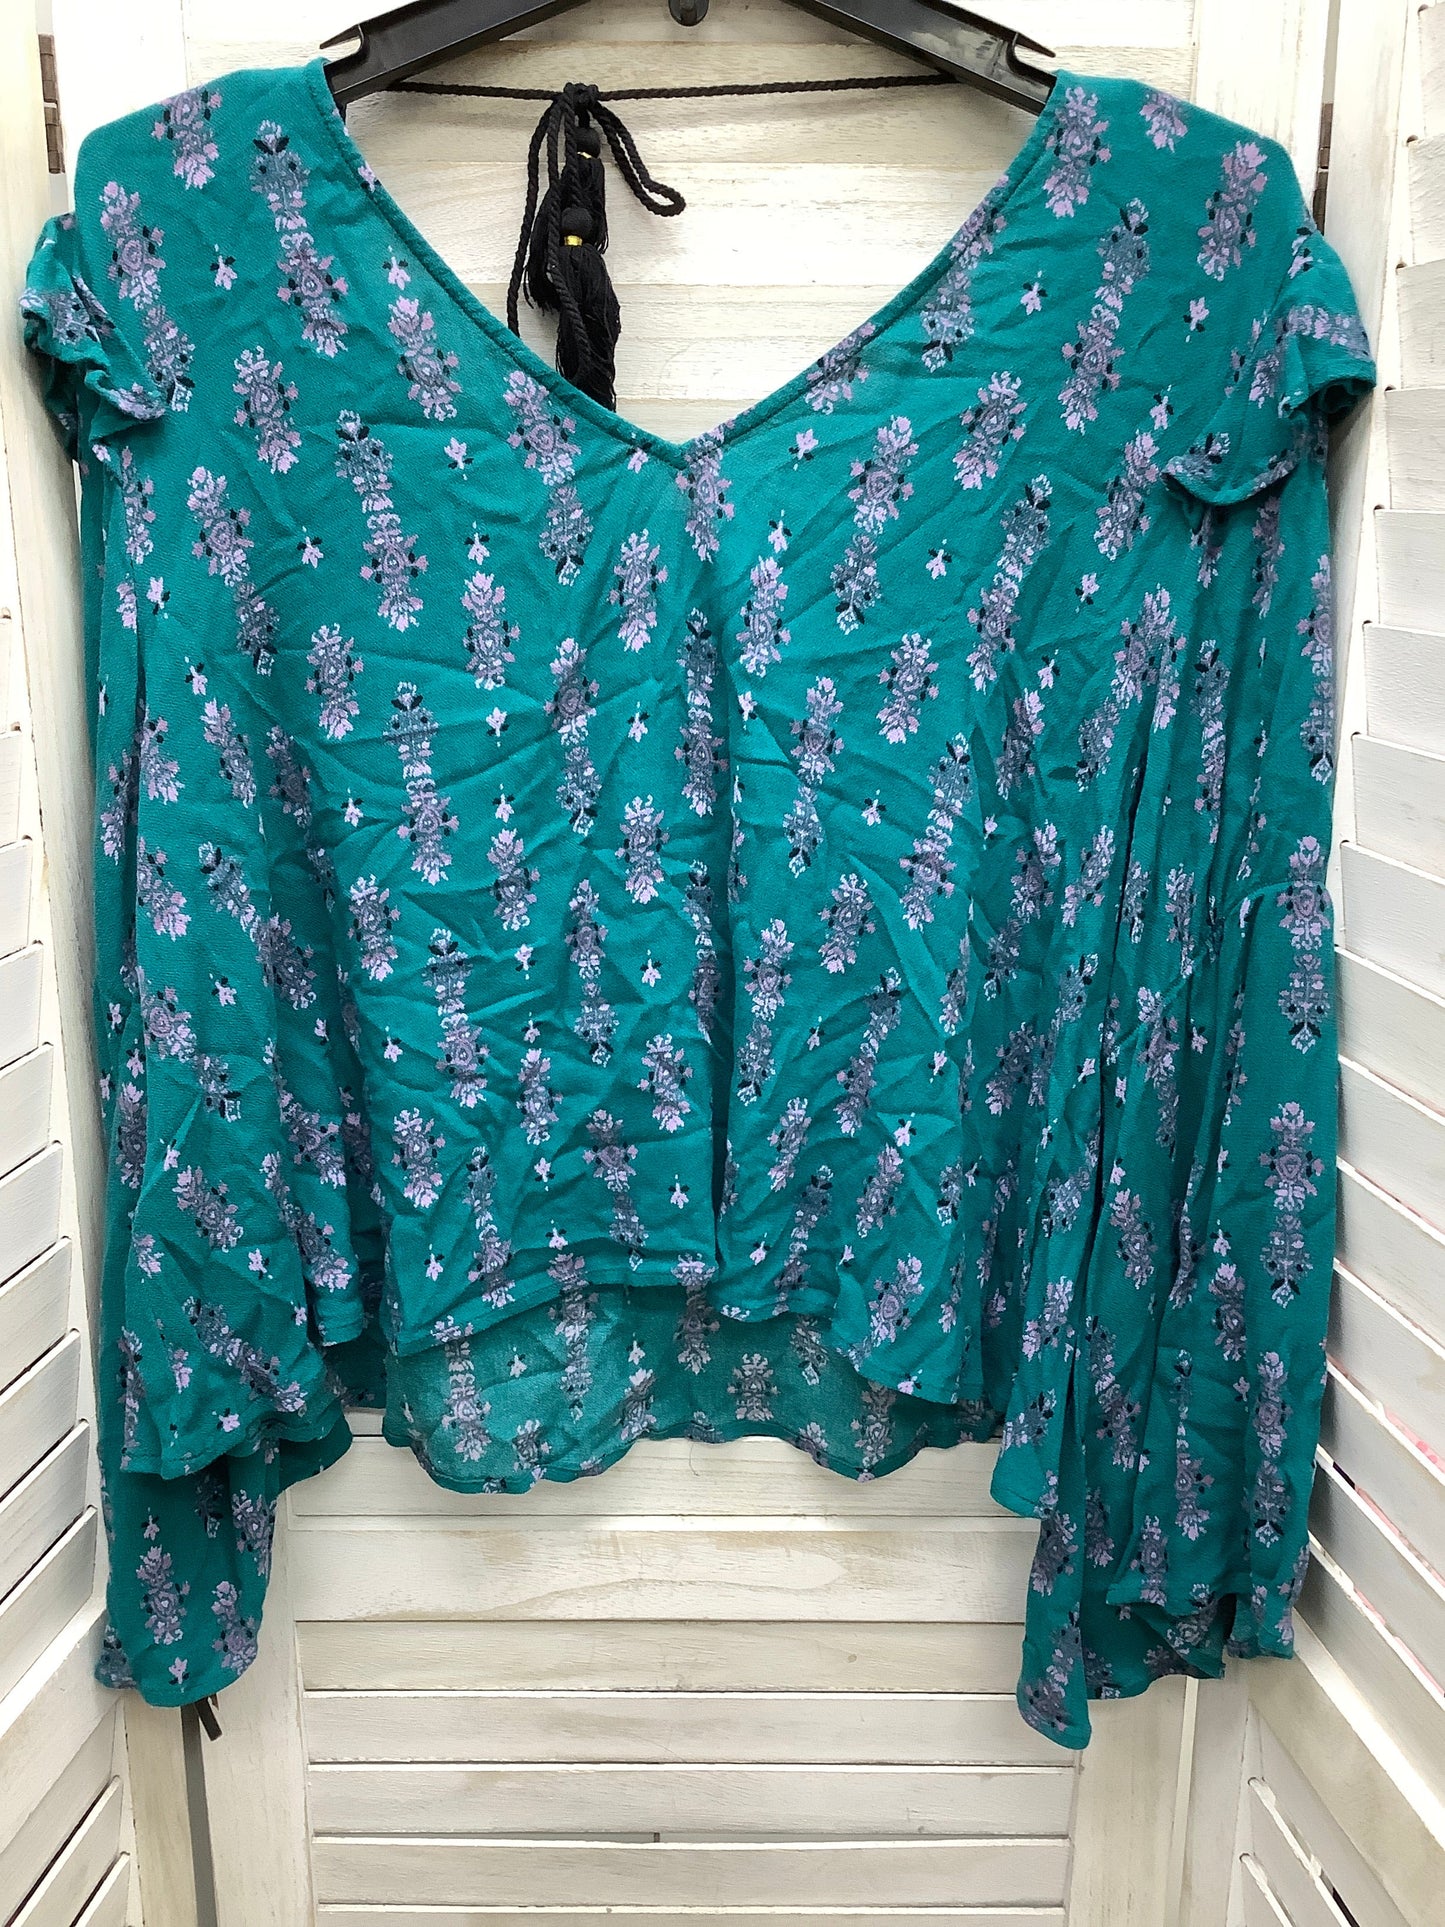 Turquoise Top Long Sleeve Bp, Size M